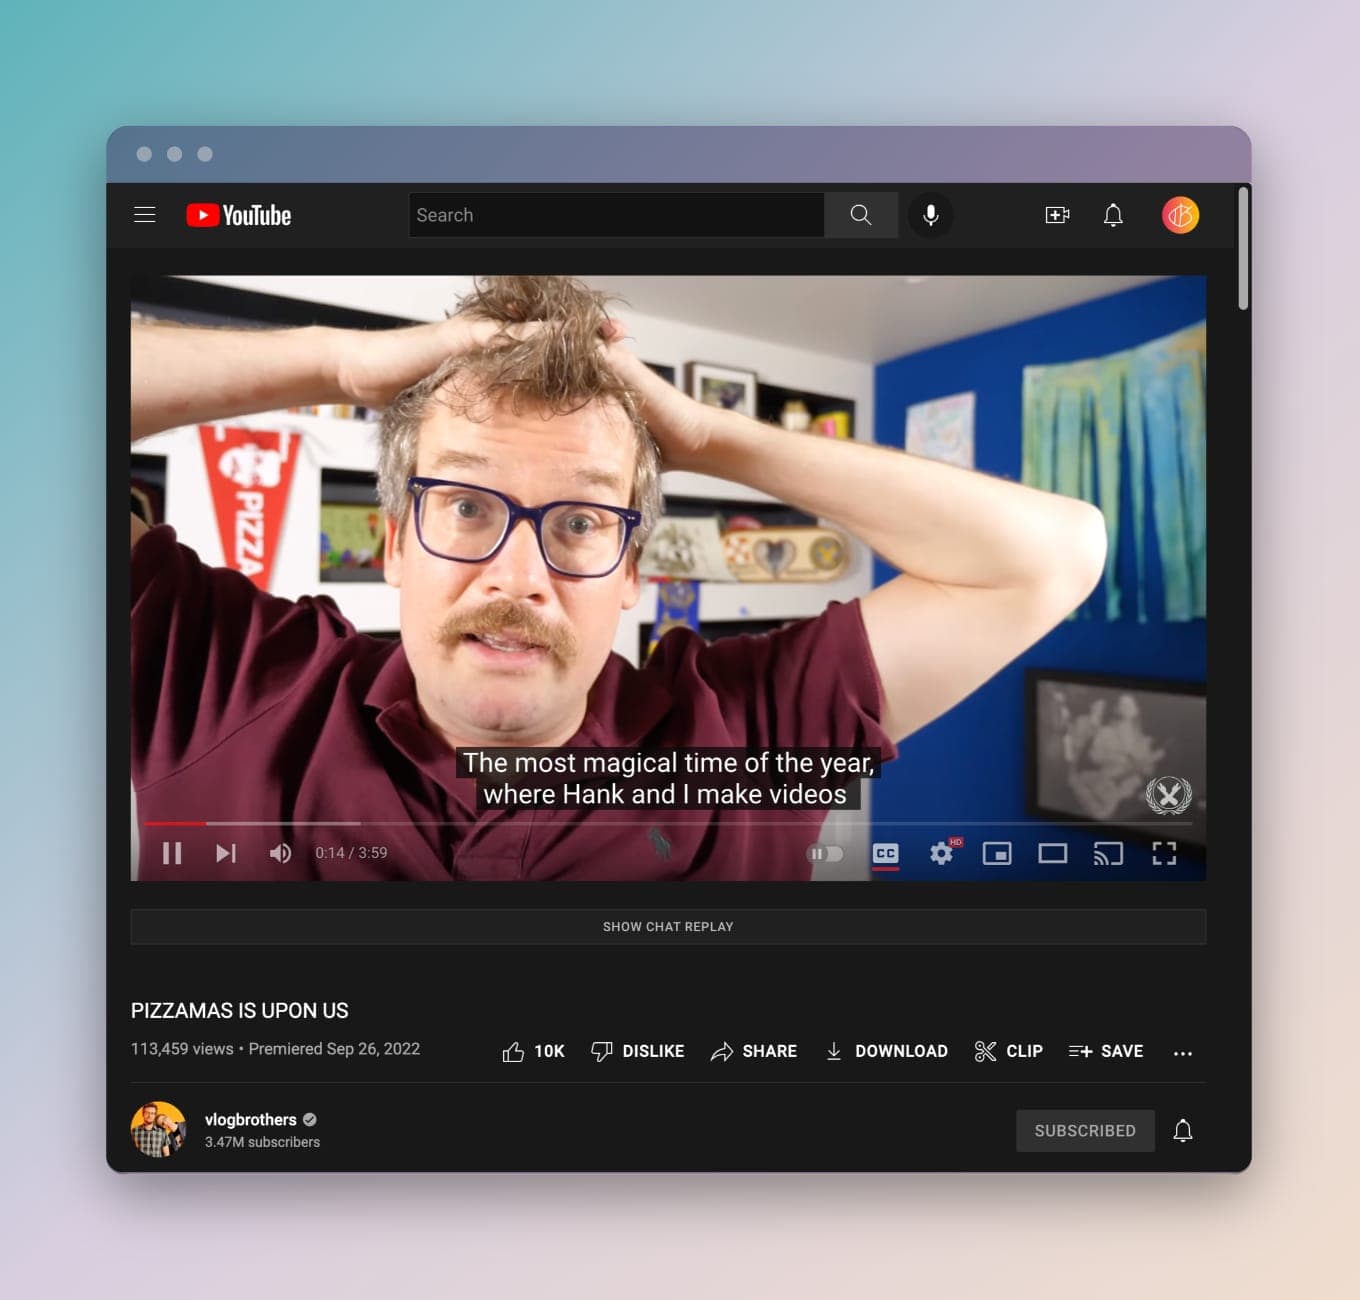 John Green sports a mustache on his YouTube channel, while the closed captioning says, "The most magical time of the year, where Hank and I make videos"